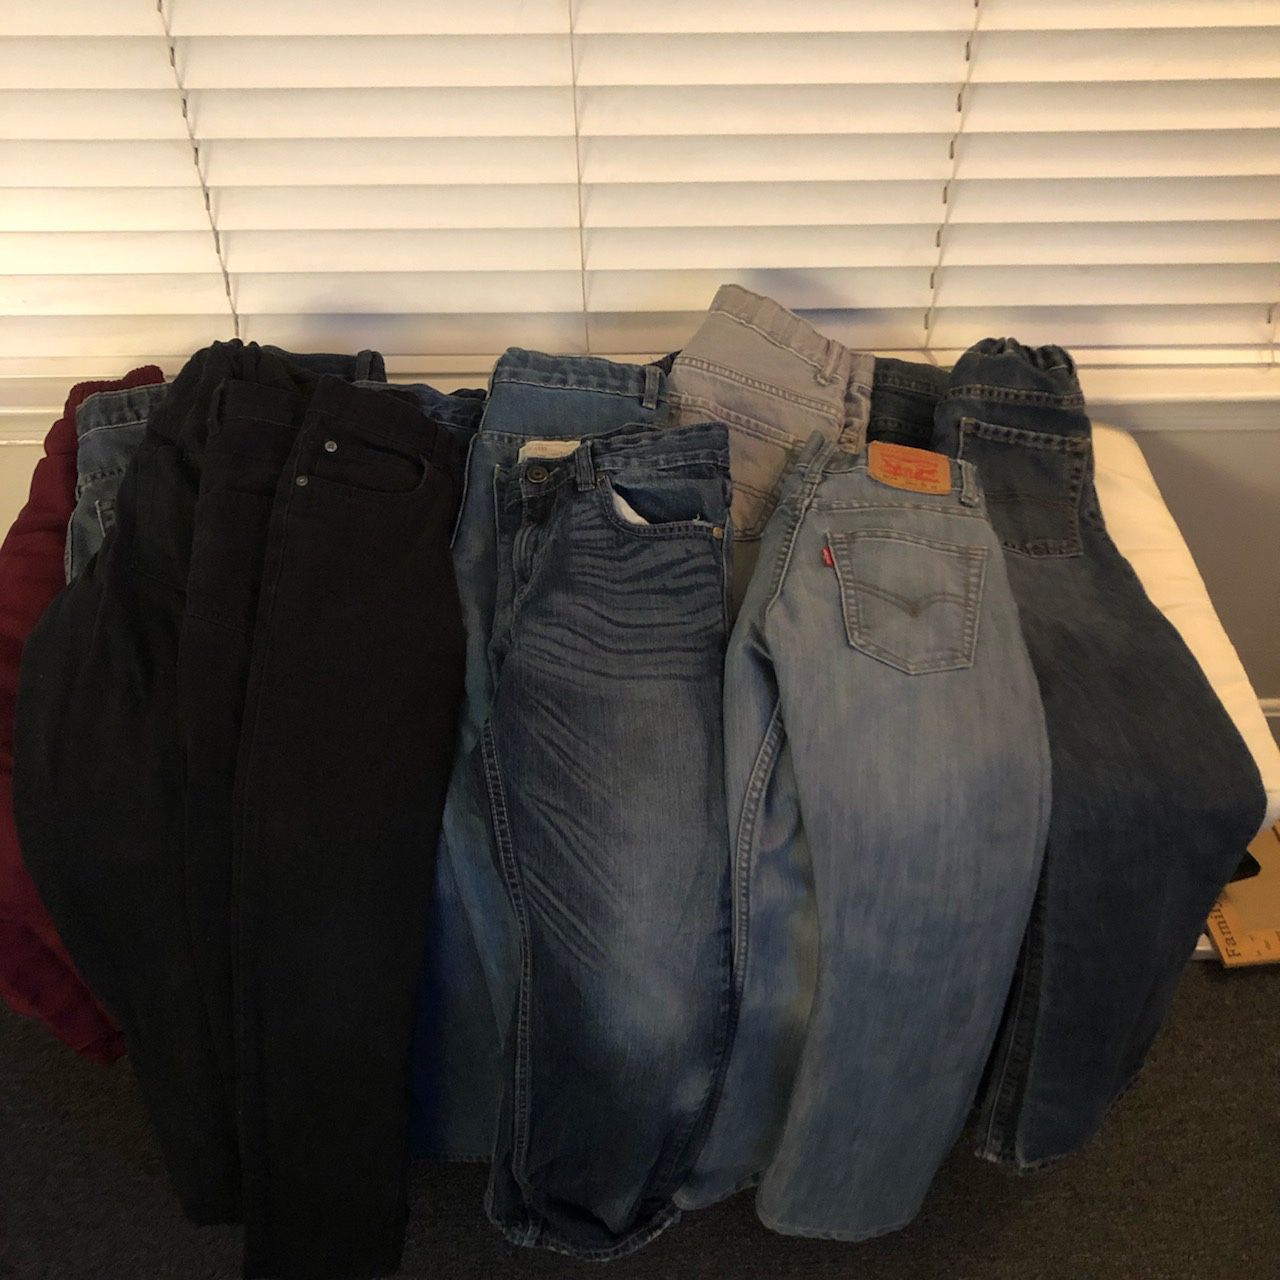 17 pair of Size 8-10 jeans